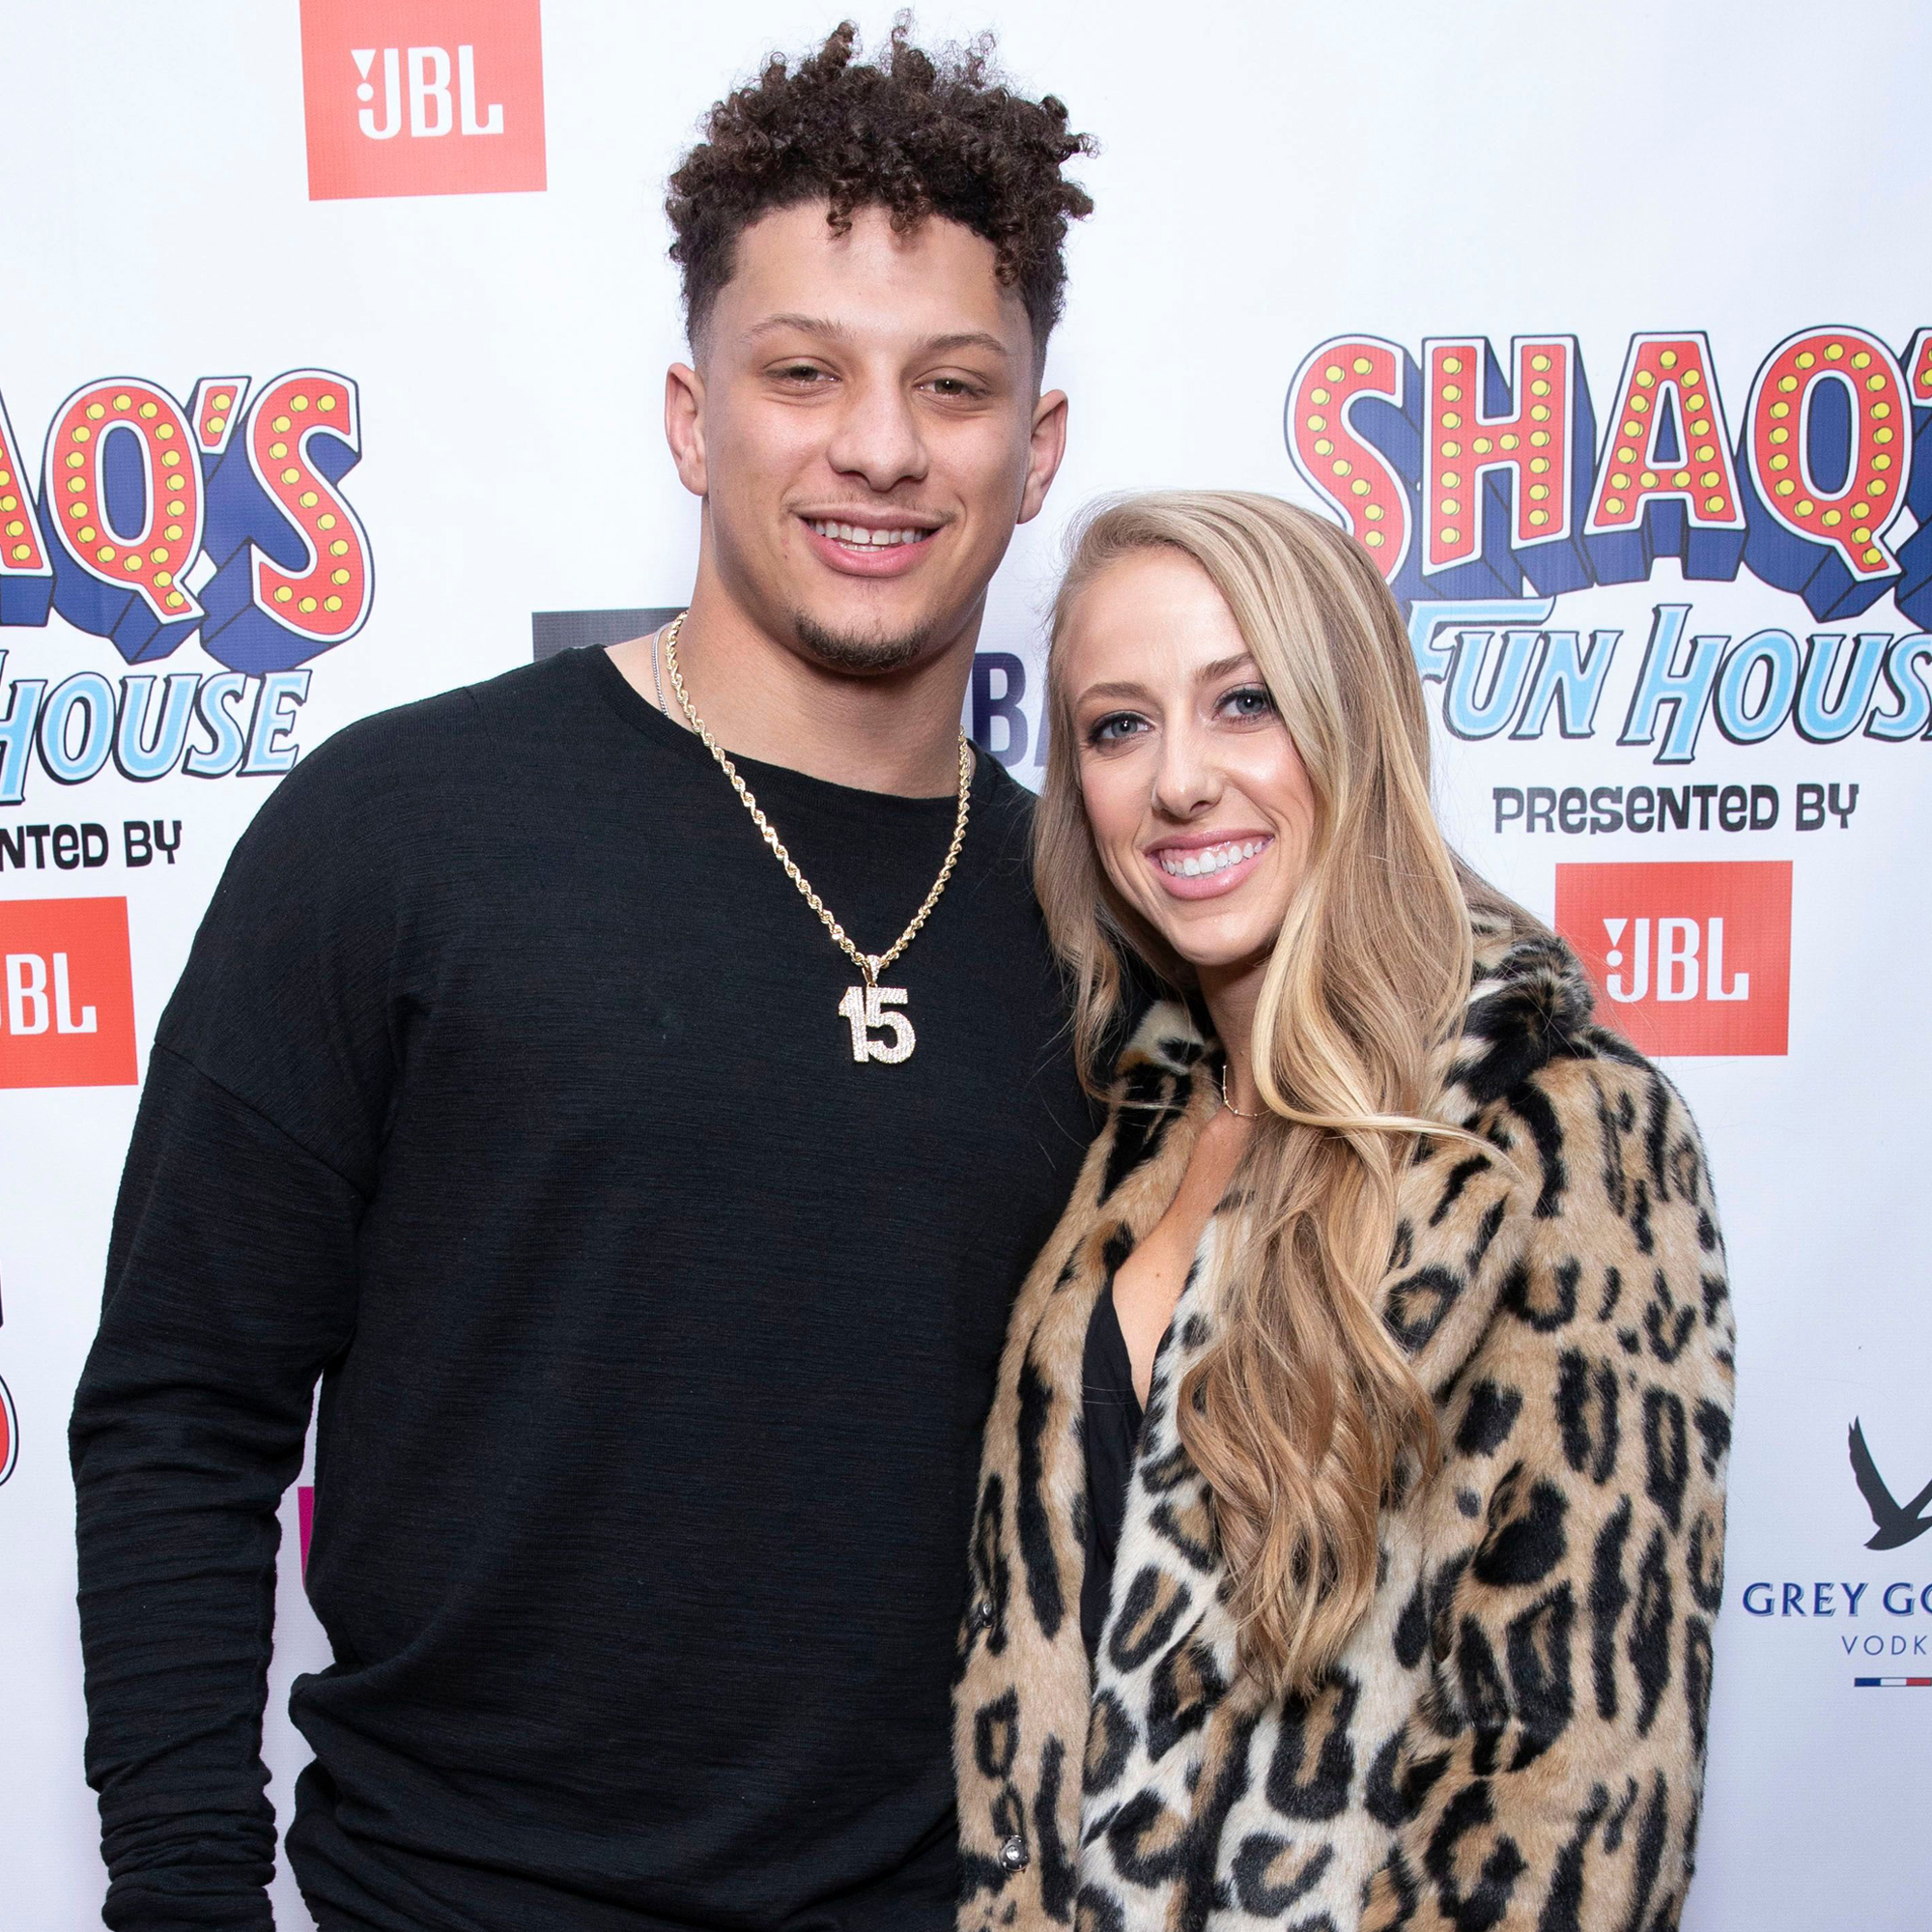 Patrick Mahomes gives baby name update with fiancée Brittany Matthews